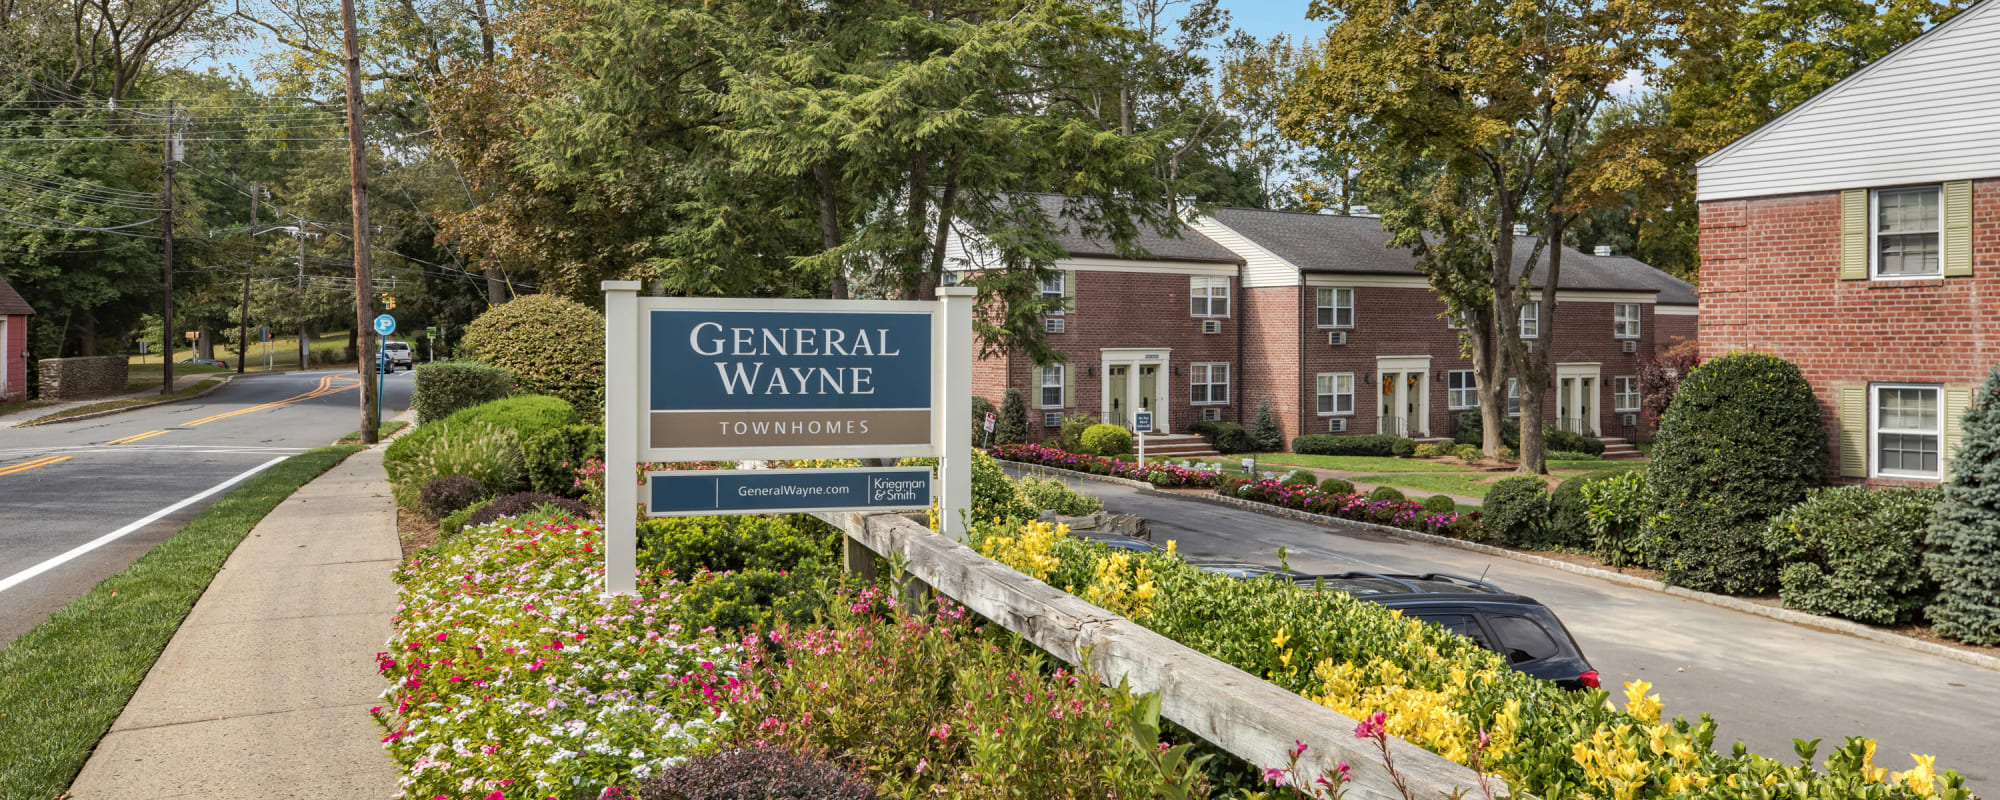 Photos of General Wayne Townhomes and Ridgedale Gardens in Madison, New Jersey